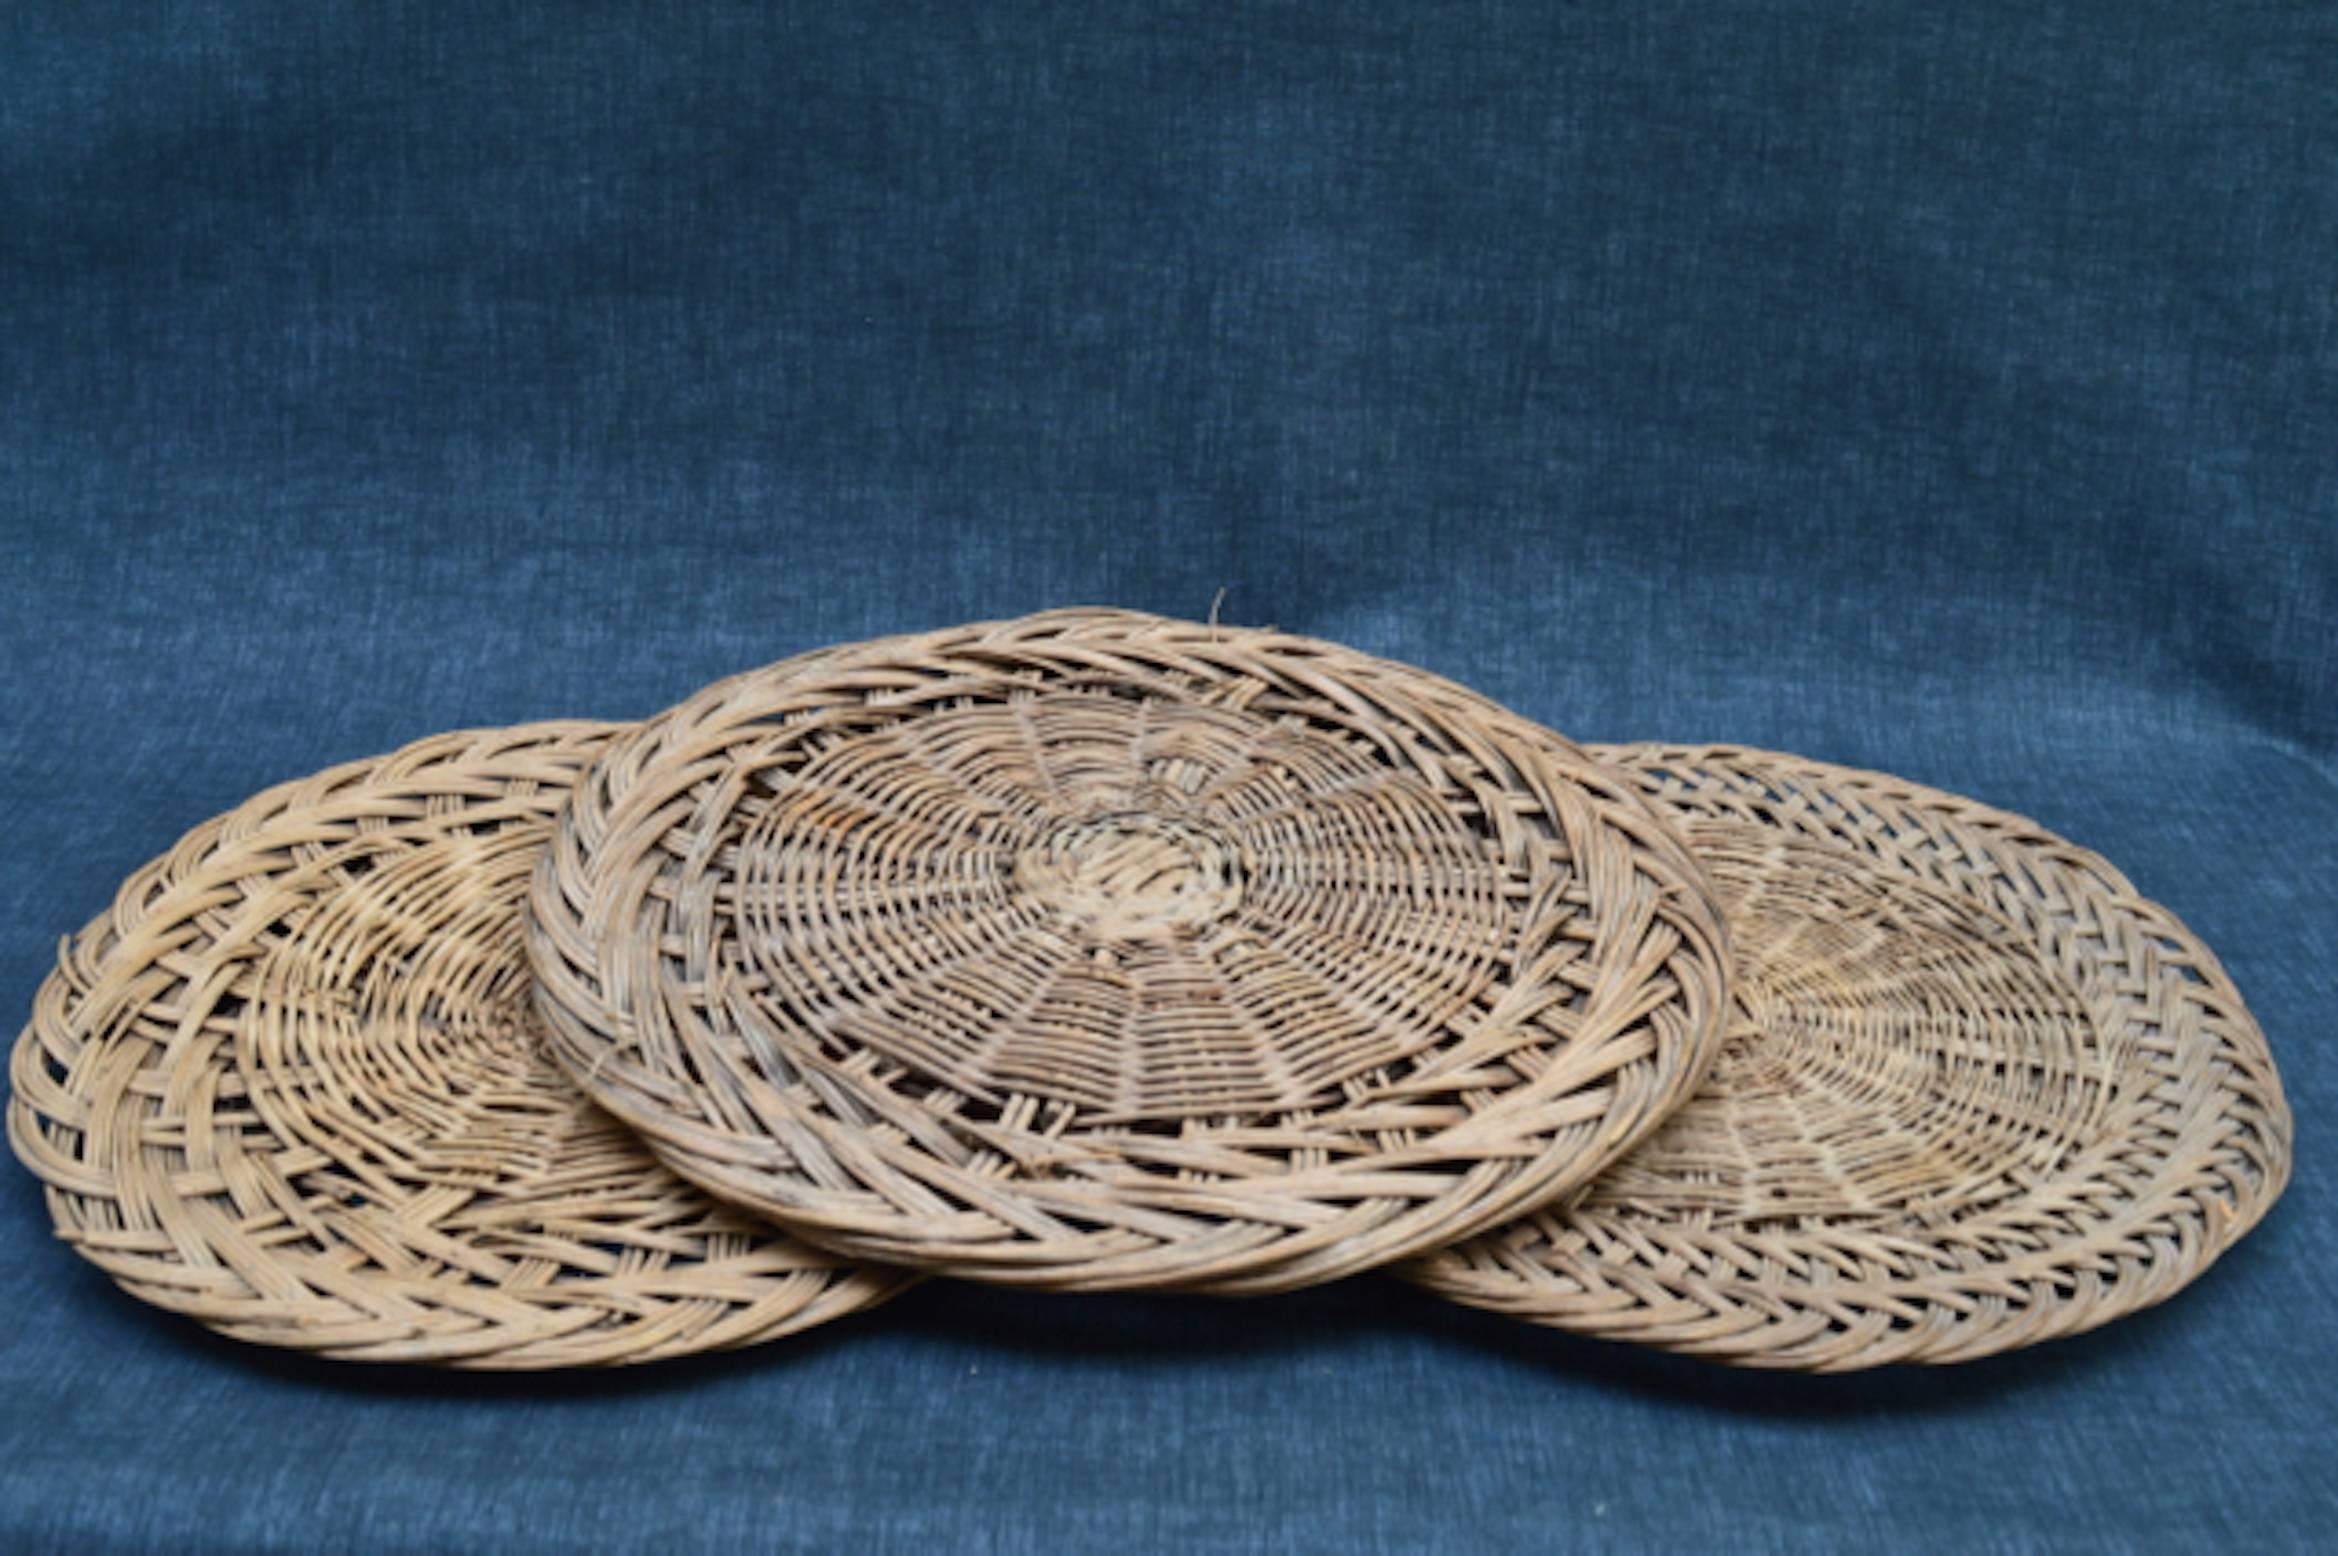 A group of three French woven wicker stands used in Provence patisserie shops and markets to display tarts and quiches, circa 1910.
Great to use for entertaining or hung on the wall for decoration.
Largest=45 cm wide. 
Smallest=39 cm wide.